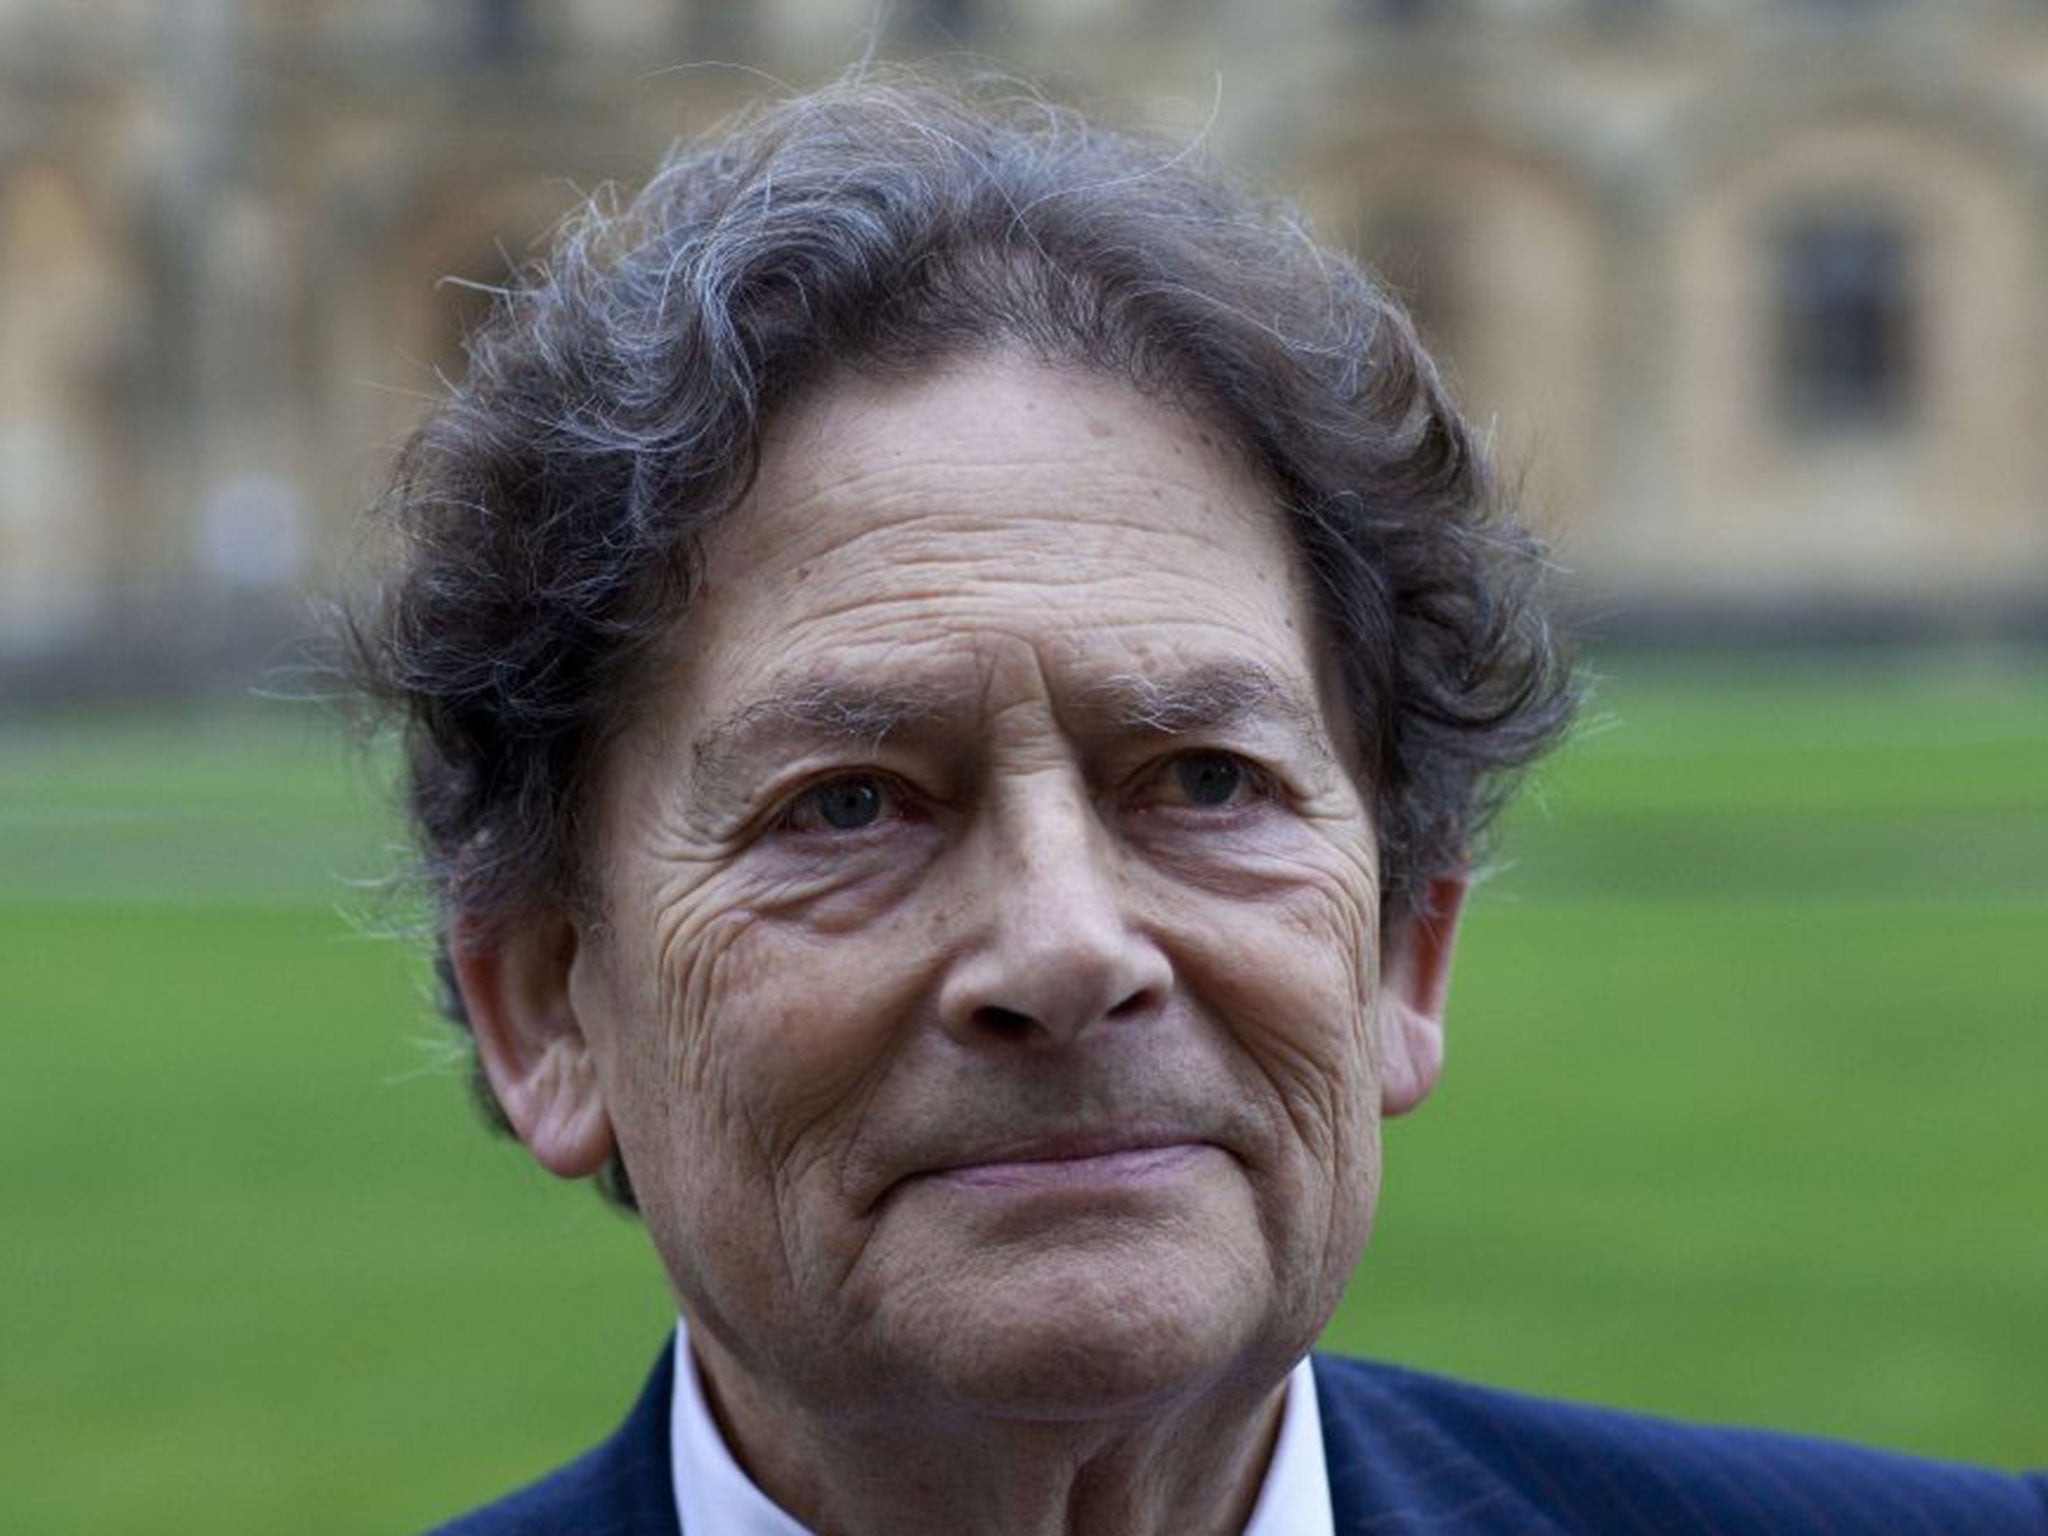 Lord Lawson is a well-known climate sceptic